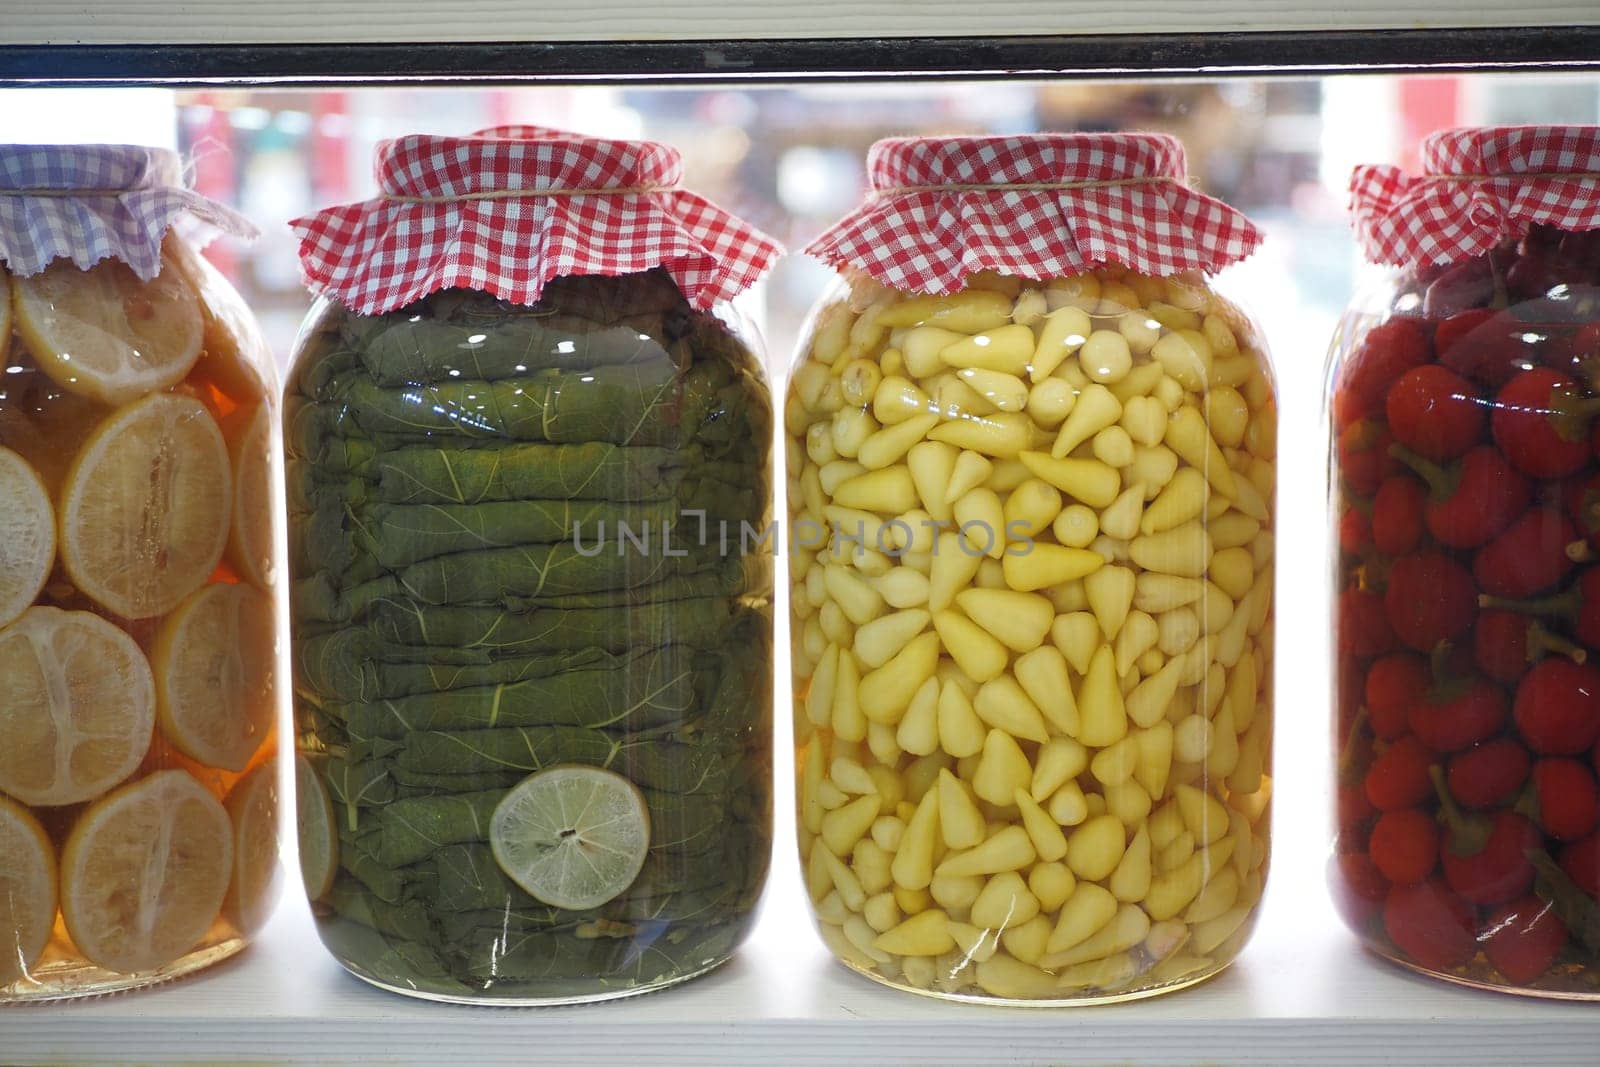 Canned fruits and vegetables in glass jars.